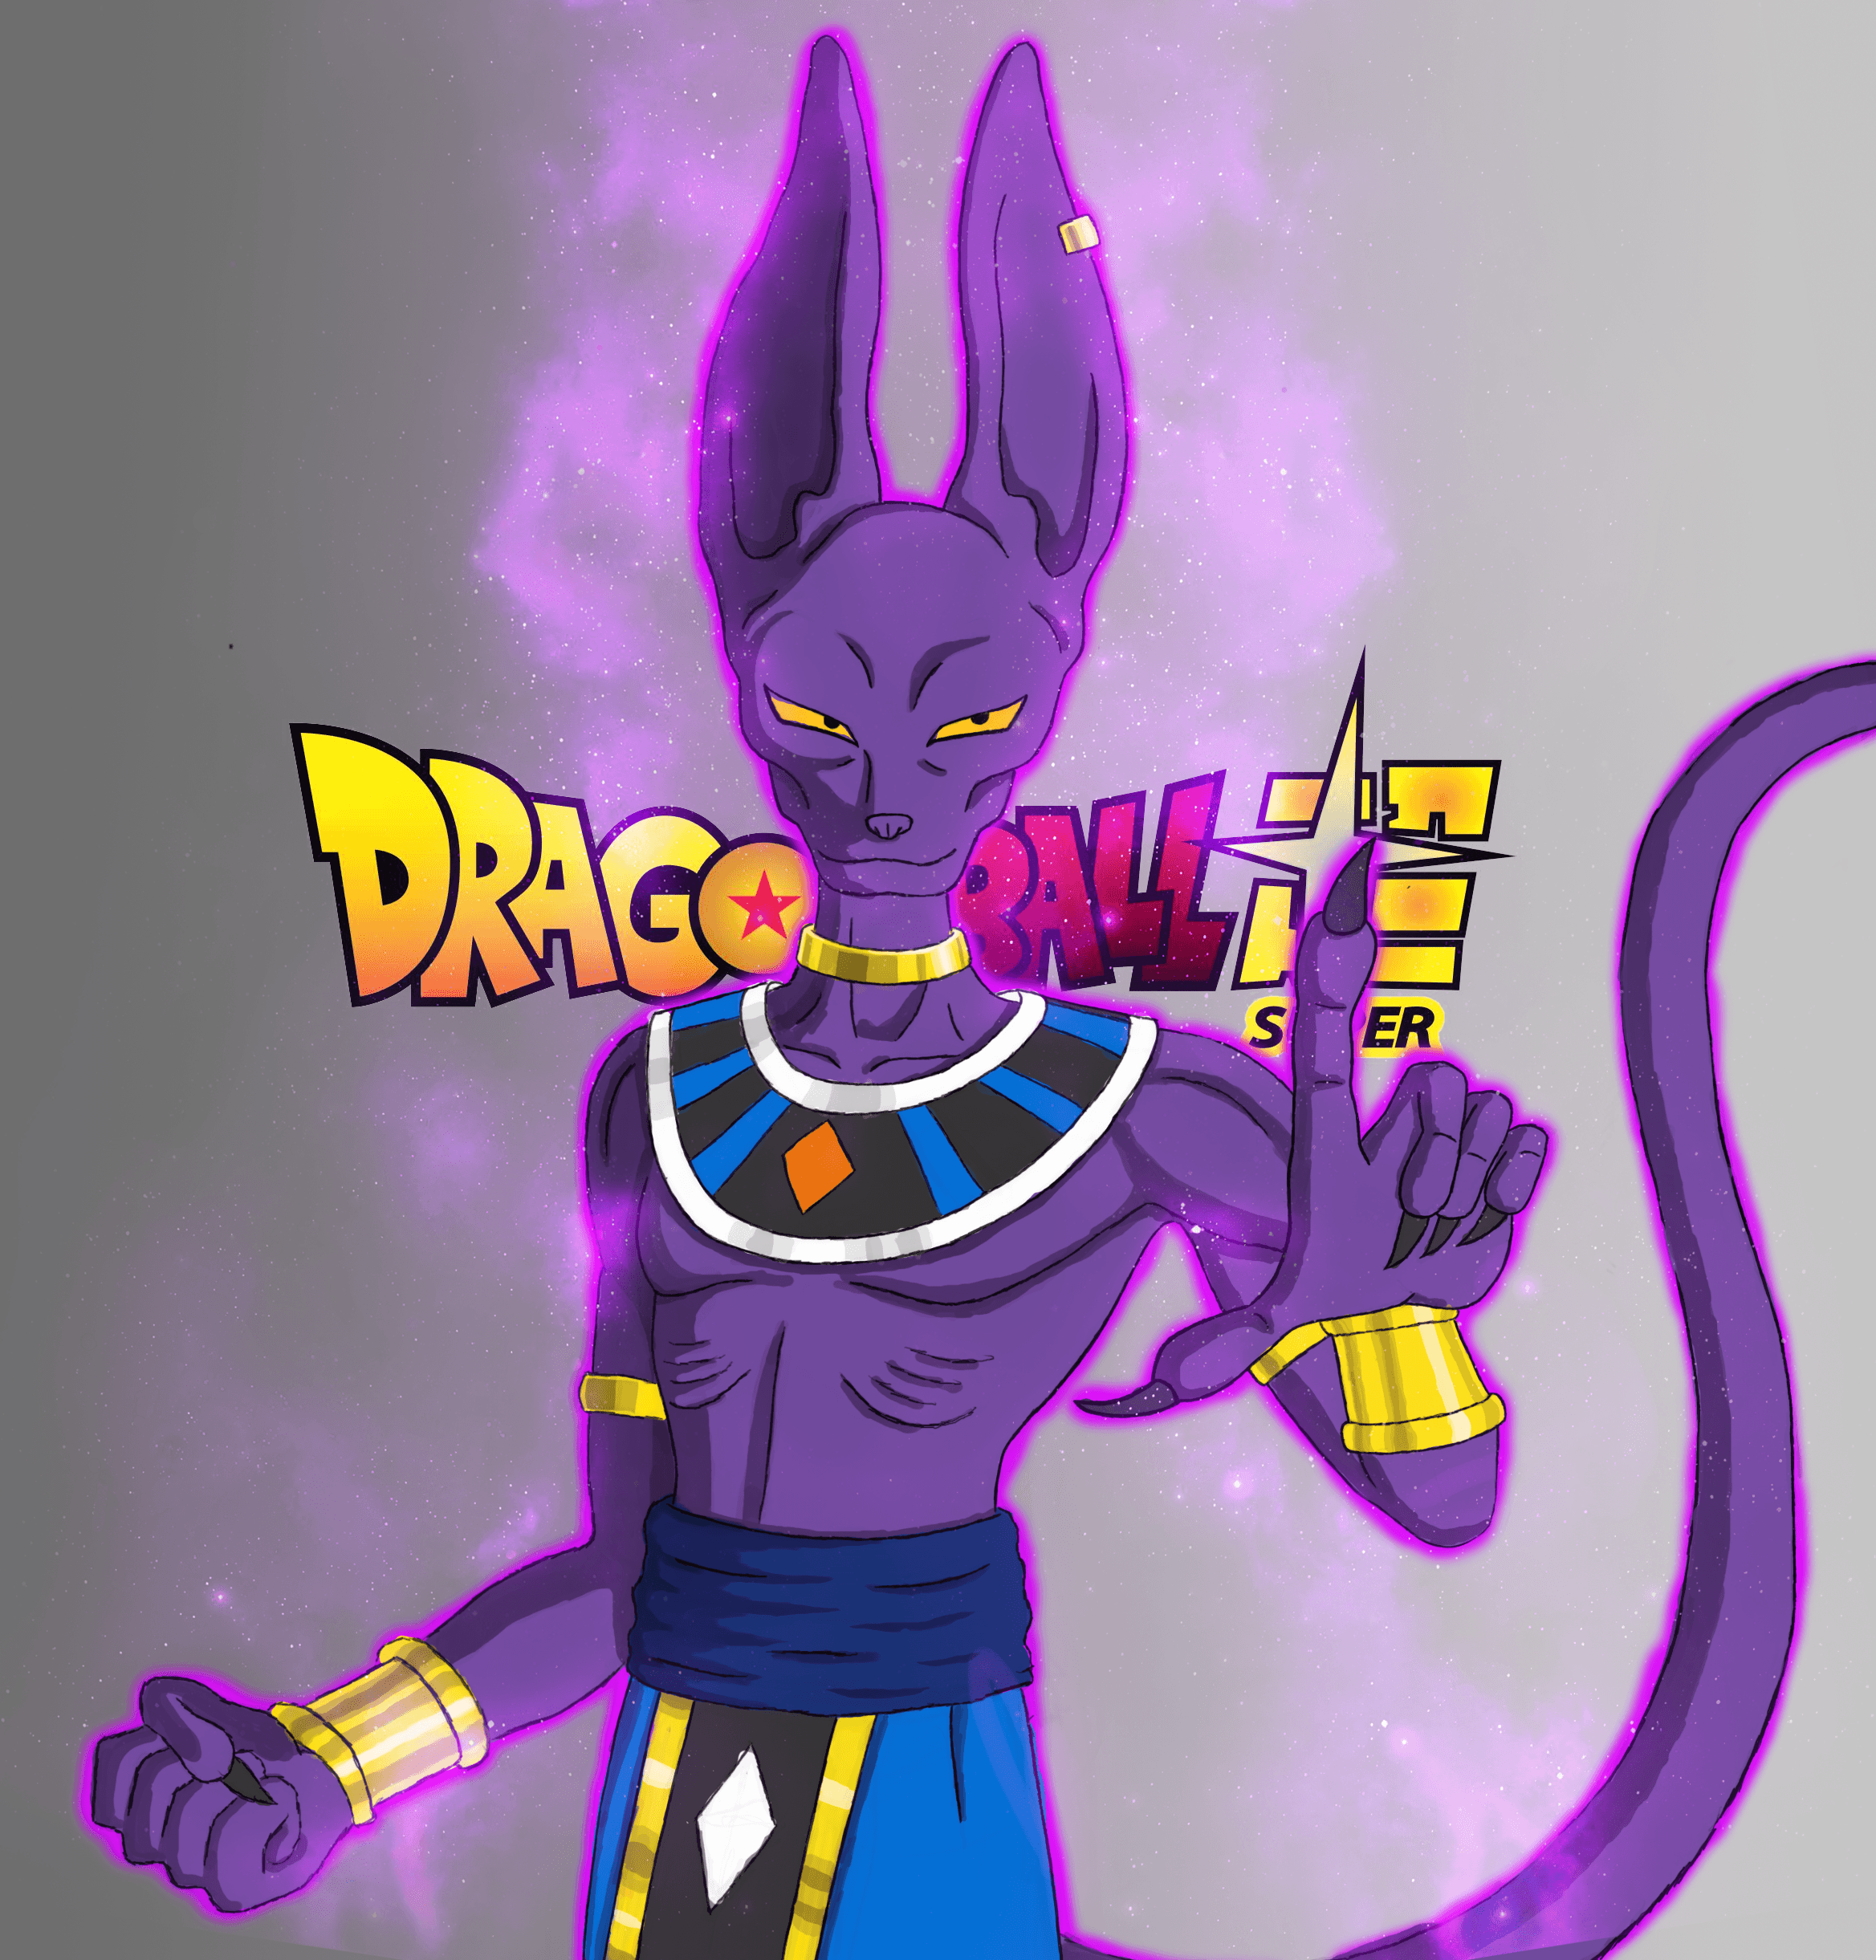 Lord Beerus the Destroyer by Melee818.